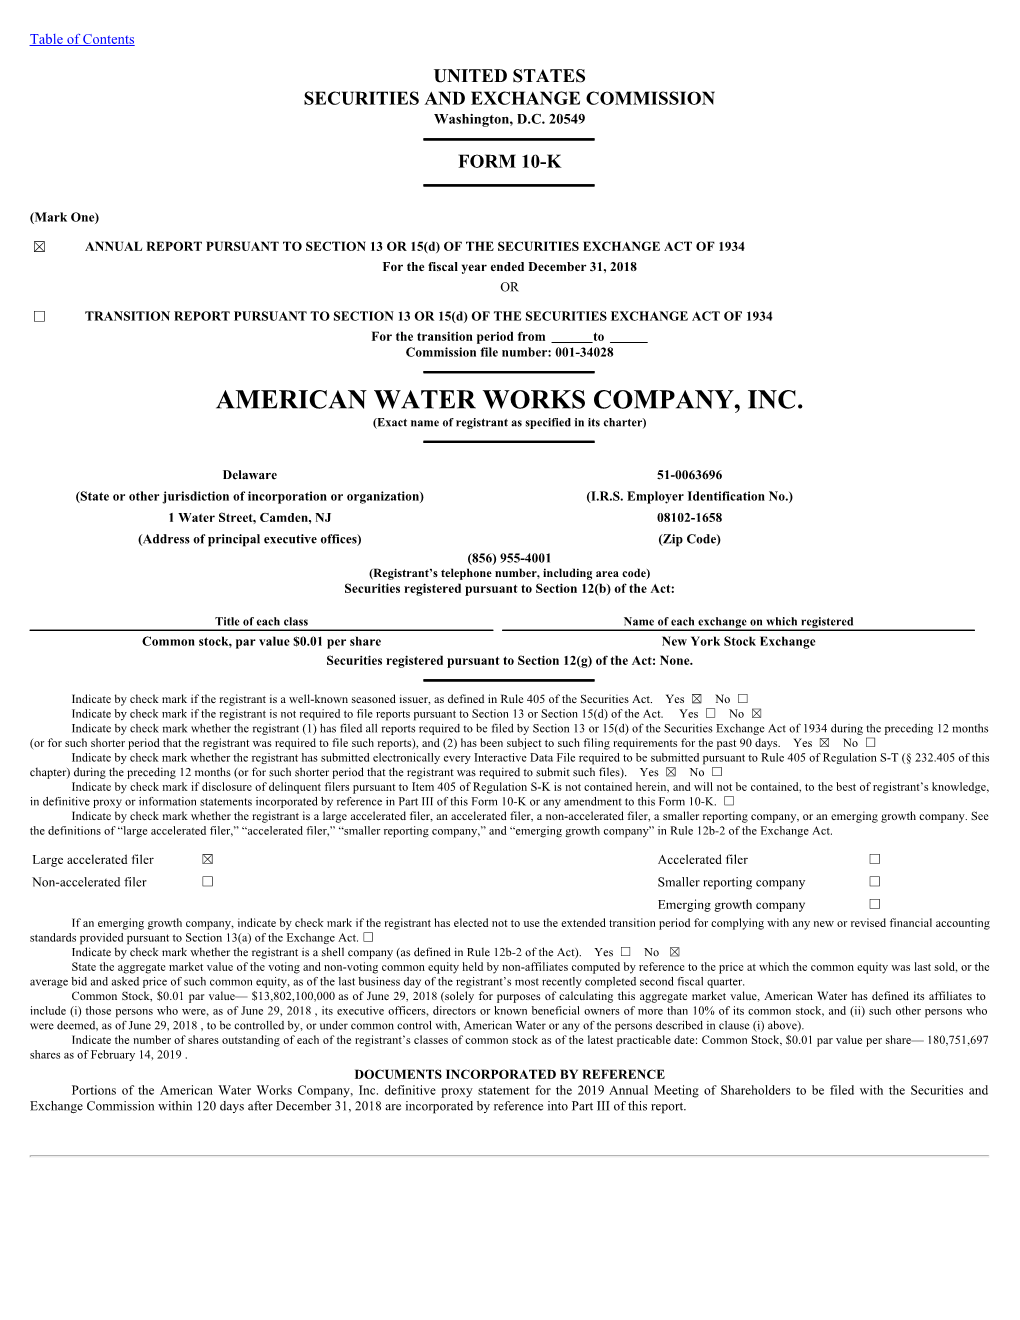 AMERICAN WATER WORKS COMPANY, INC. (Exact Name of Registrant As Specified in Its Charter)